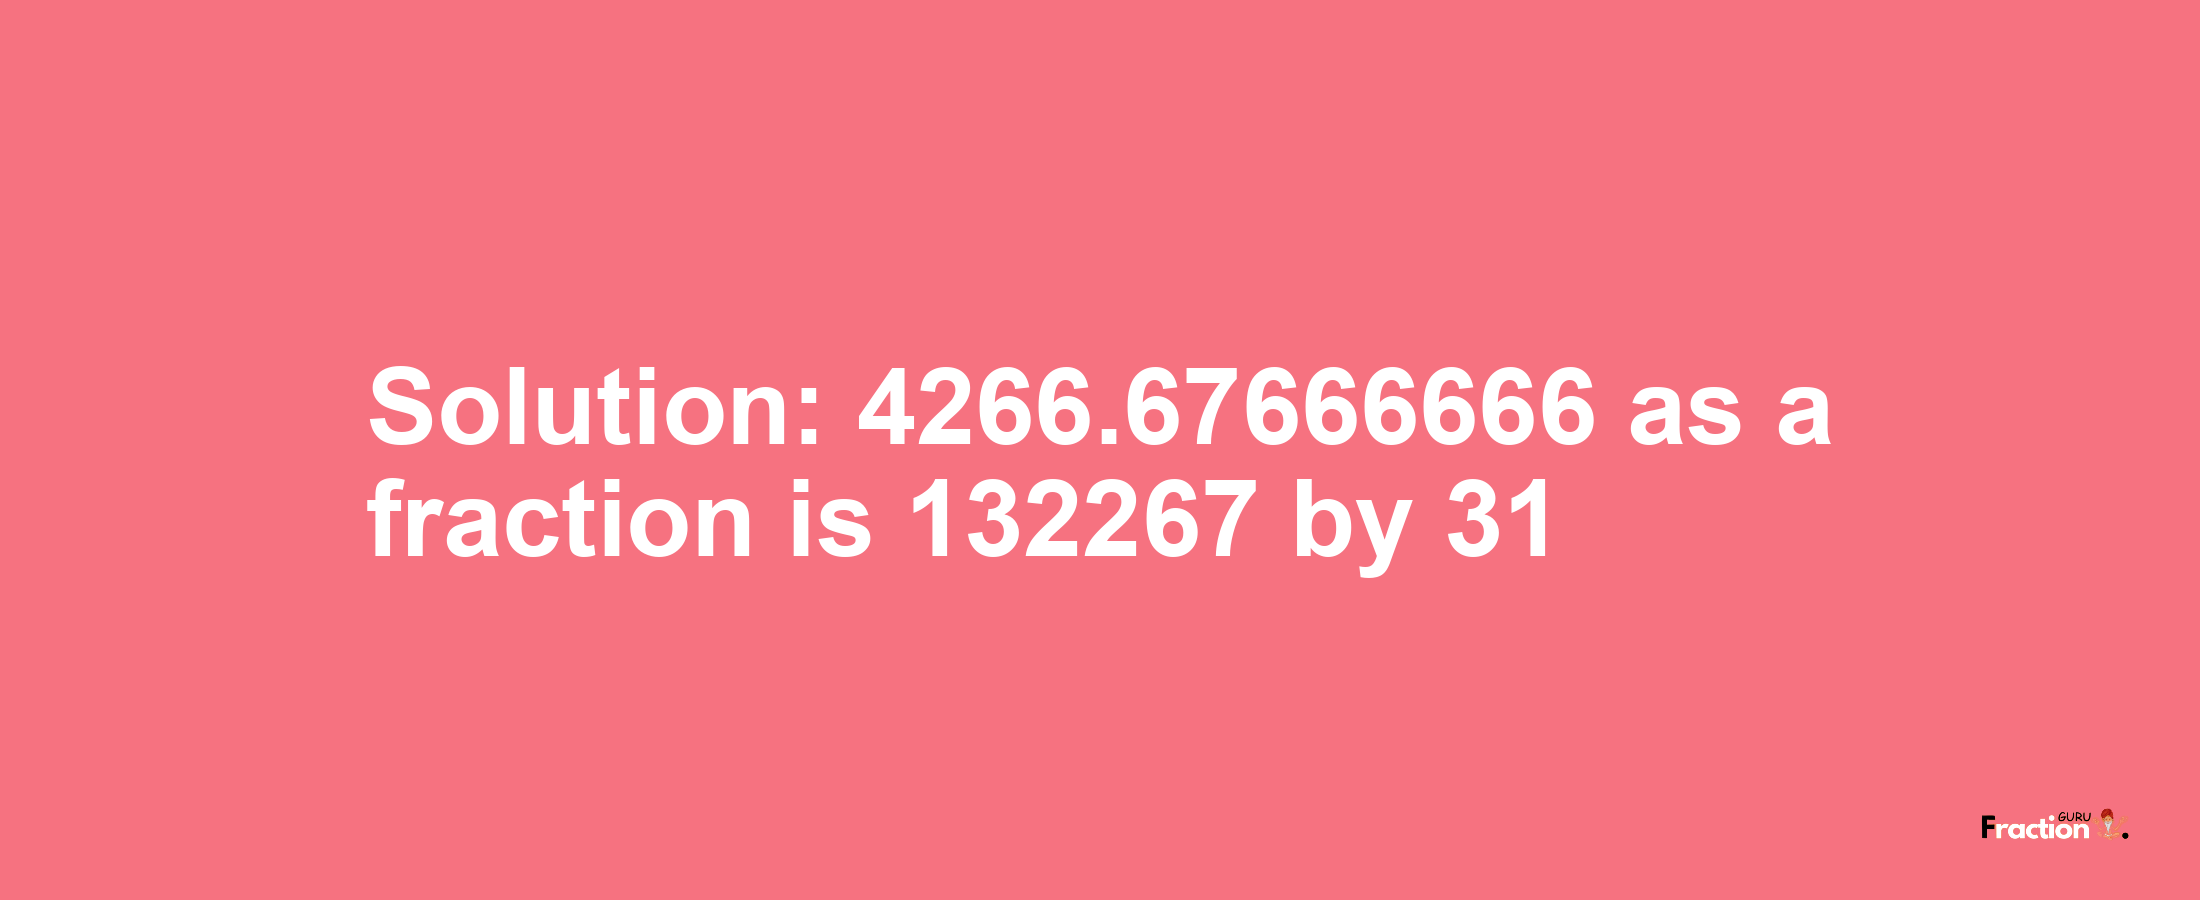 Solution:4266.67666666 as a fraction is 132267/31